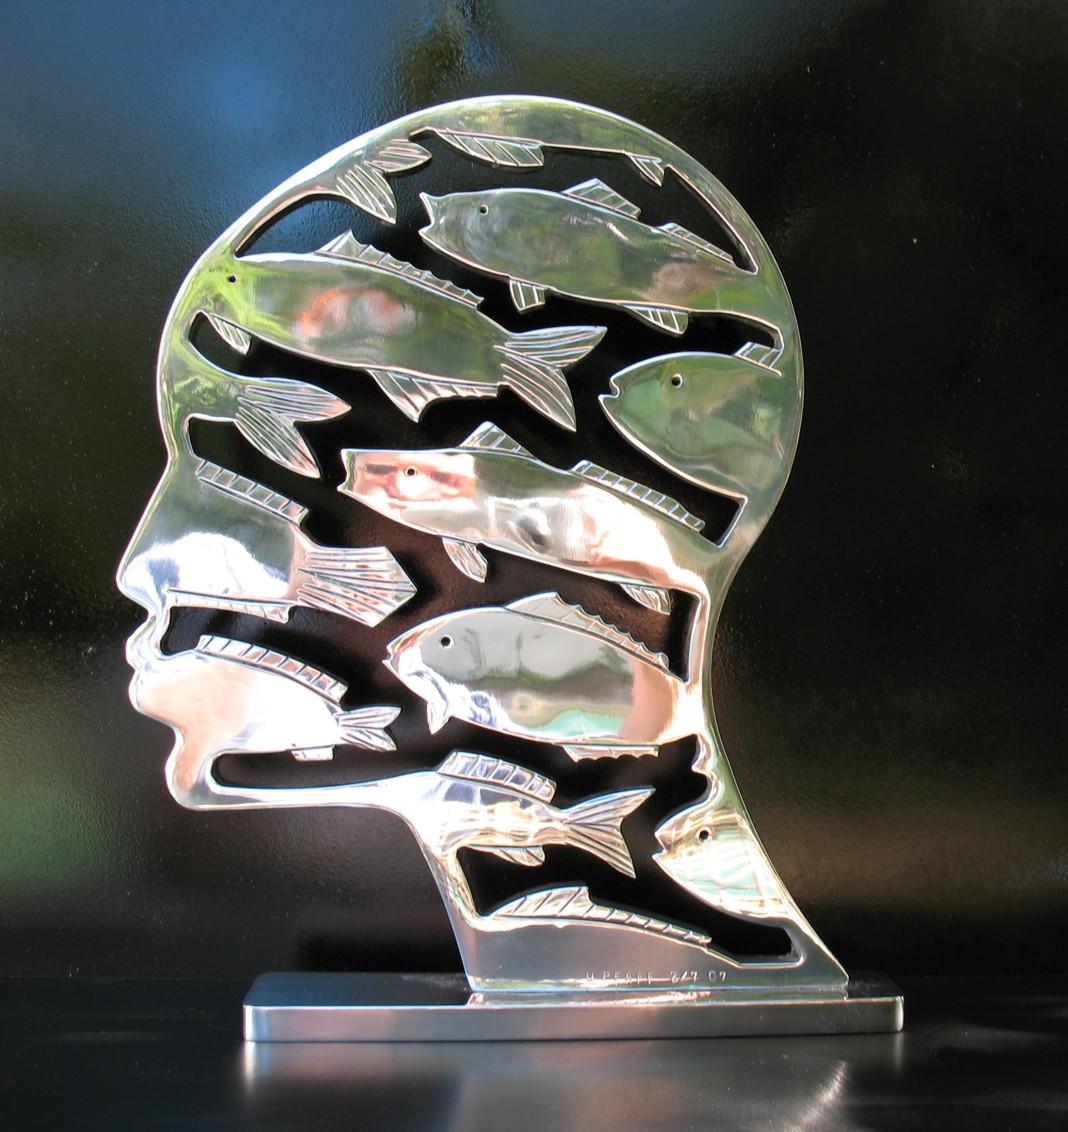 Limited Edition Nickel Plated Steel Sculpture "School of Thought"